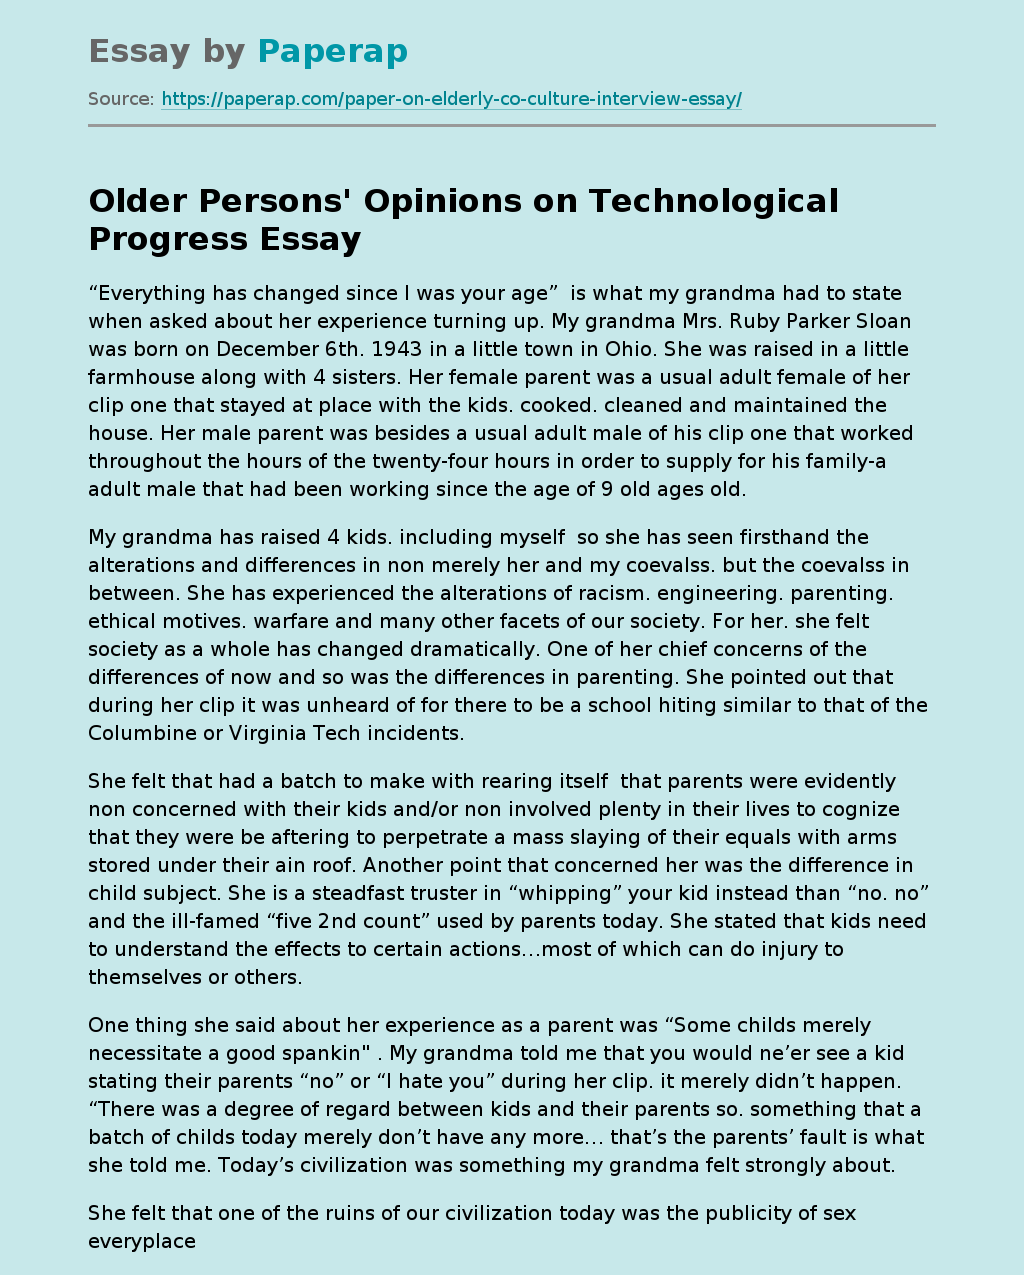 Older Persons' Opinions on Technological Progress